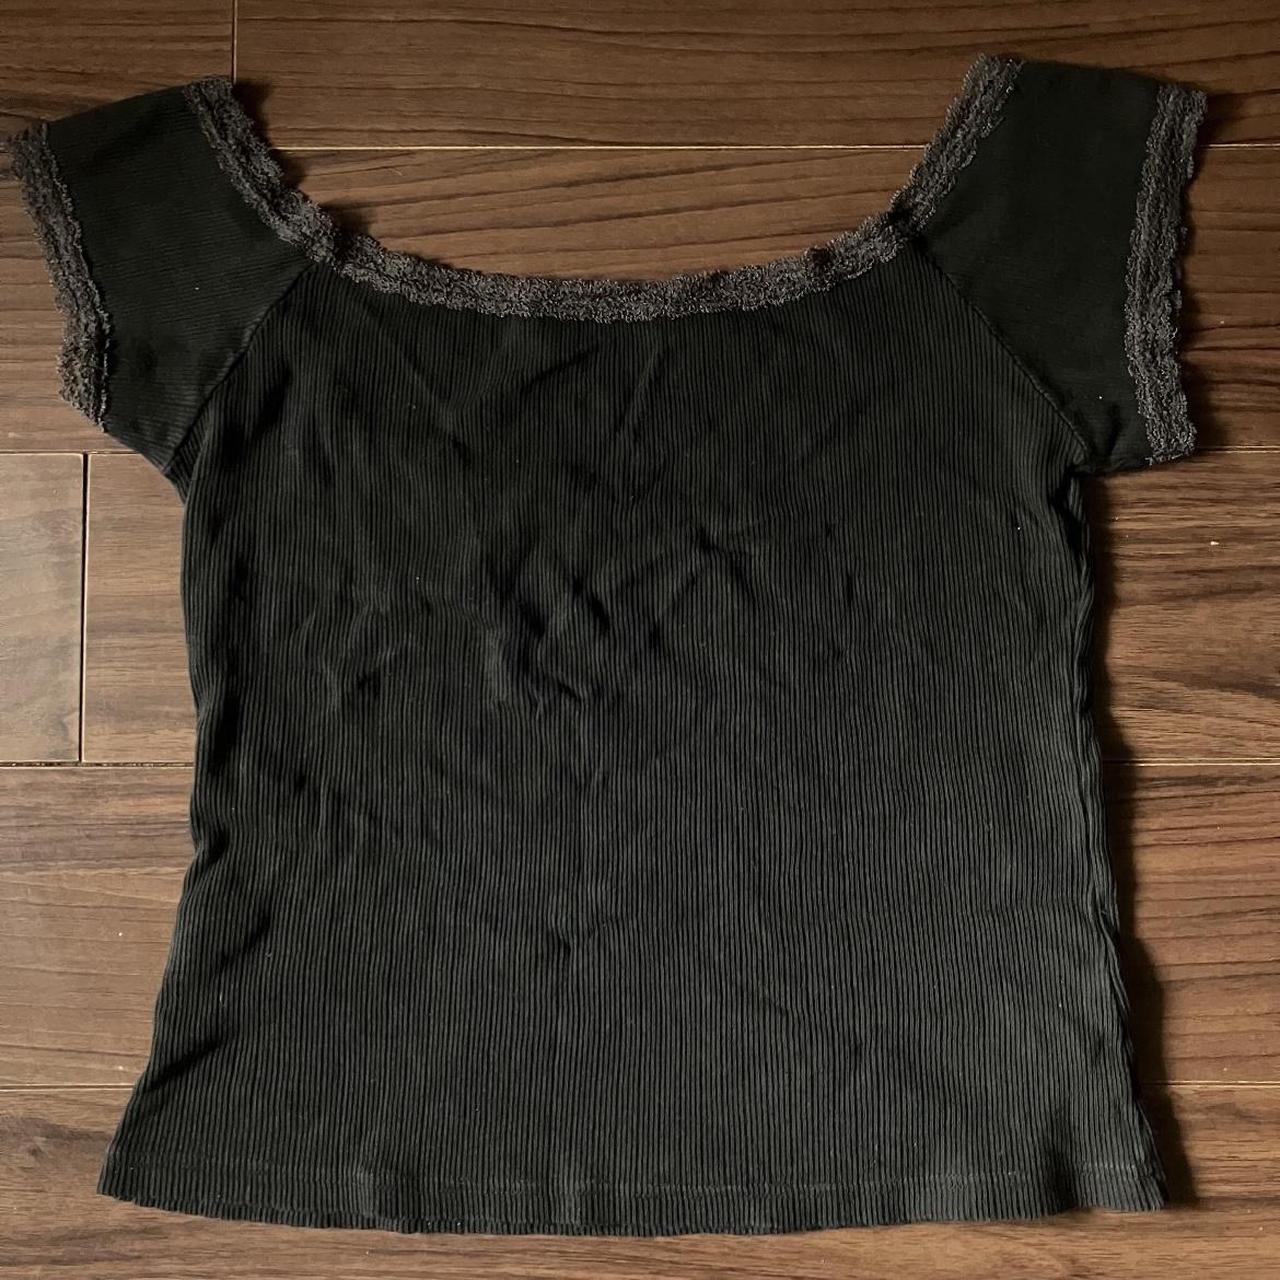 ✧ Rare Brandy Melville Eden Lace Top in Black like Gothic/emo, Women's  Fashion, Tops, Shirts on Carousell